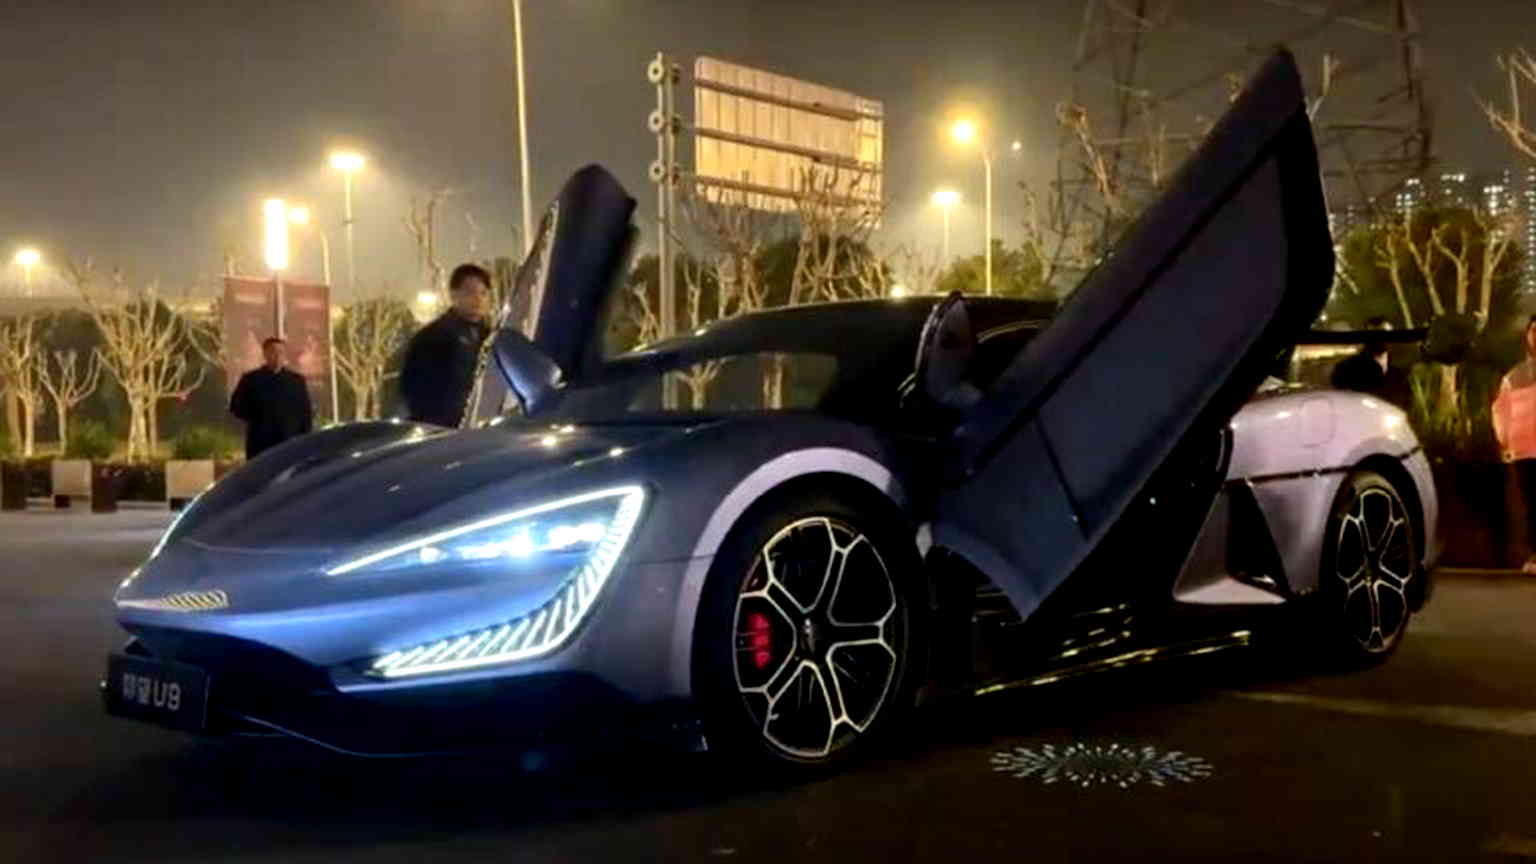 China’s BYD unveils dancing EV supercar that costs $233,000